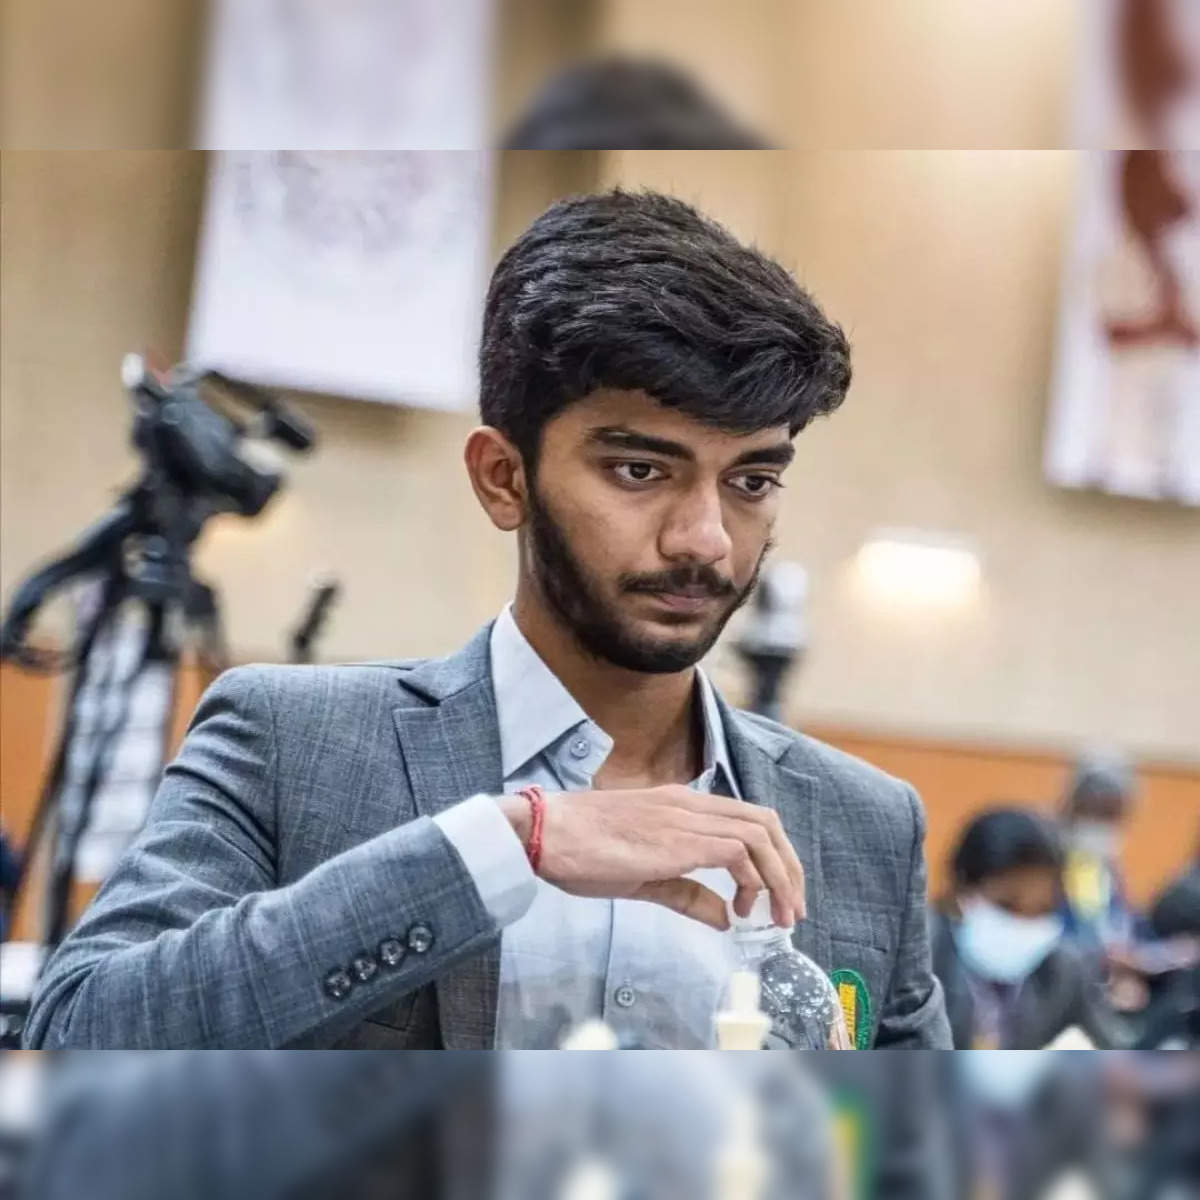 D Gukesh becomes youngest to beat World Chess Champion Magnus Carlsen